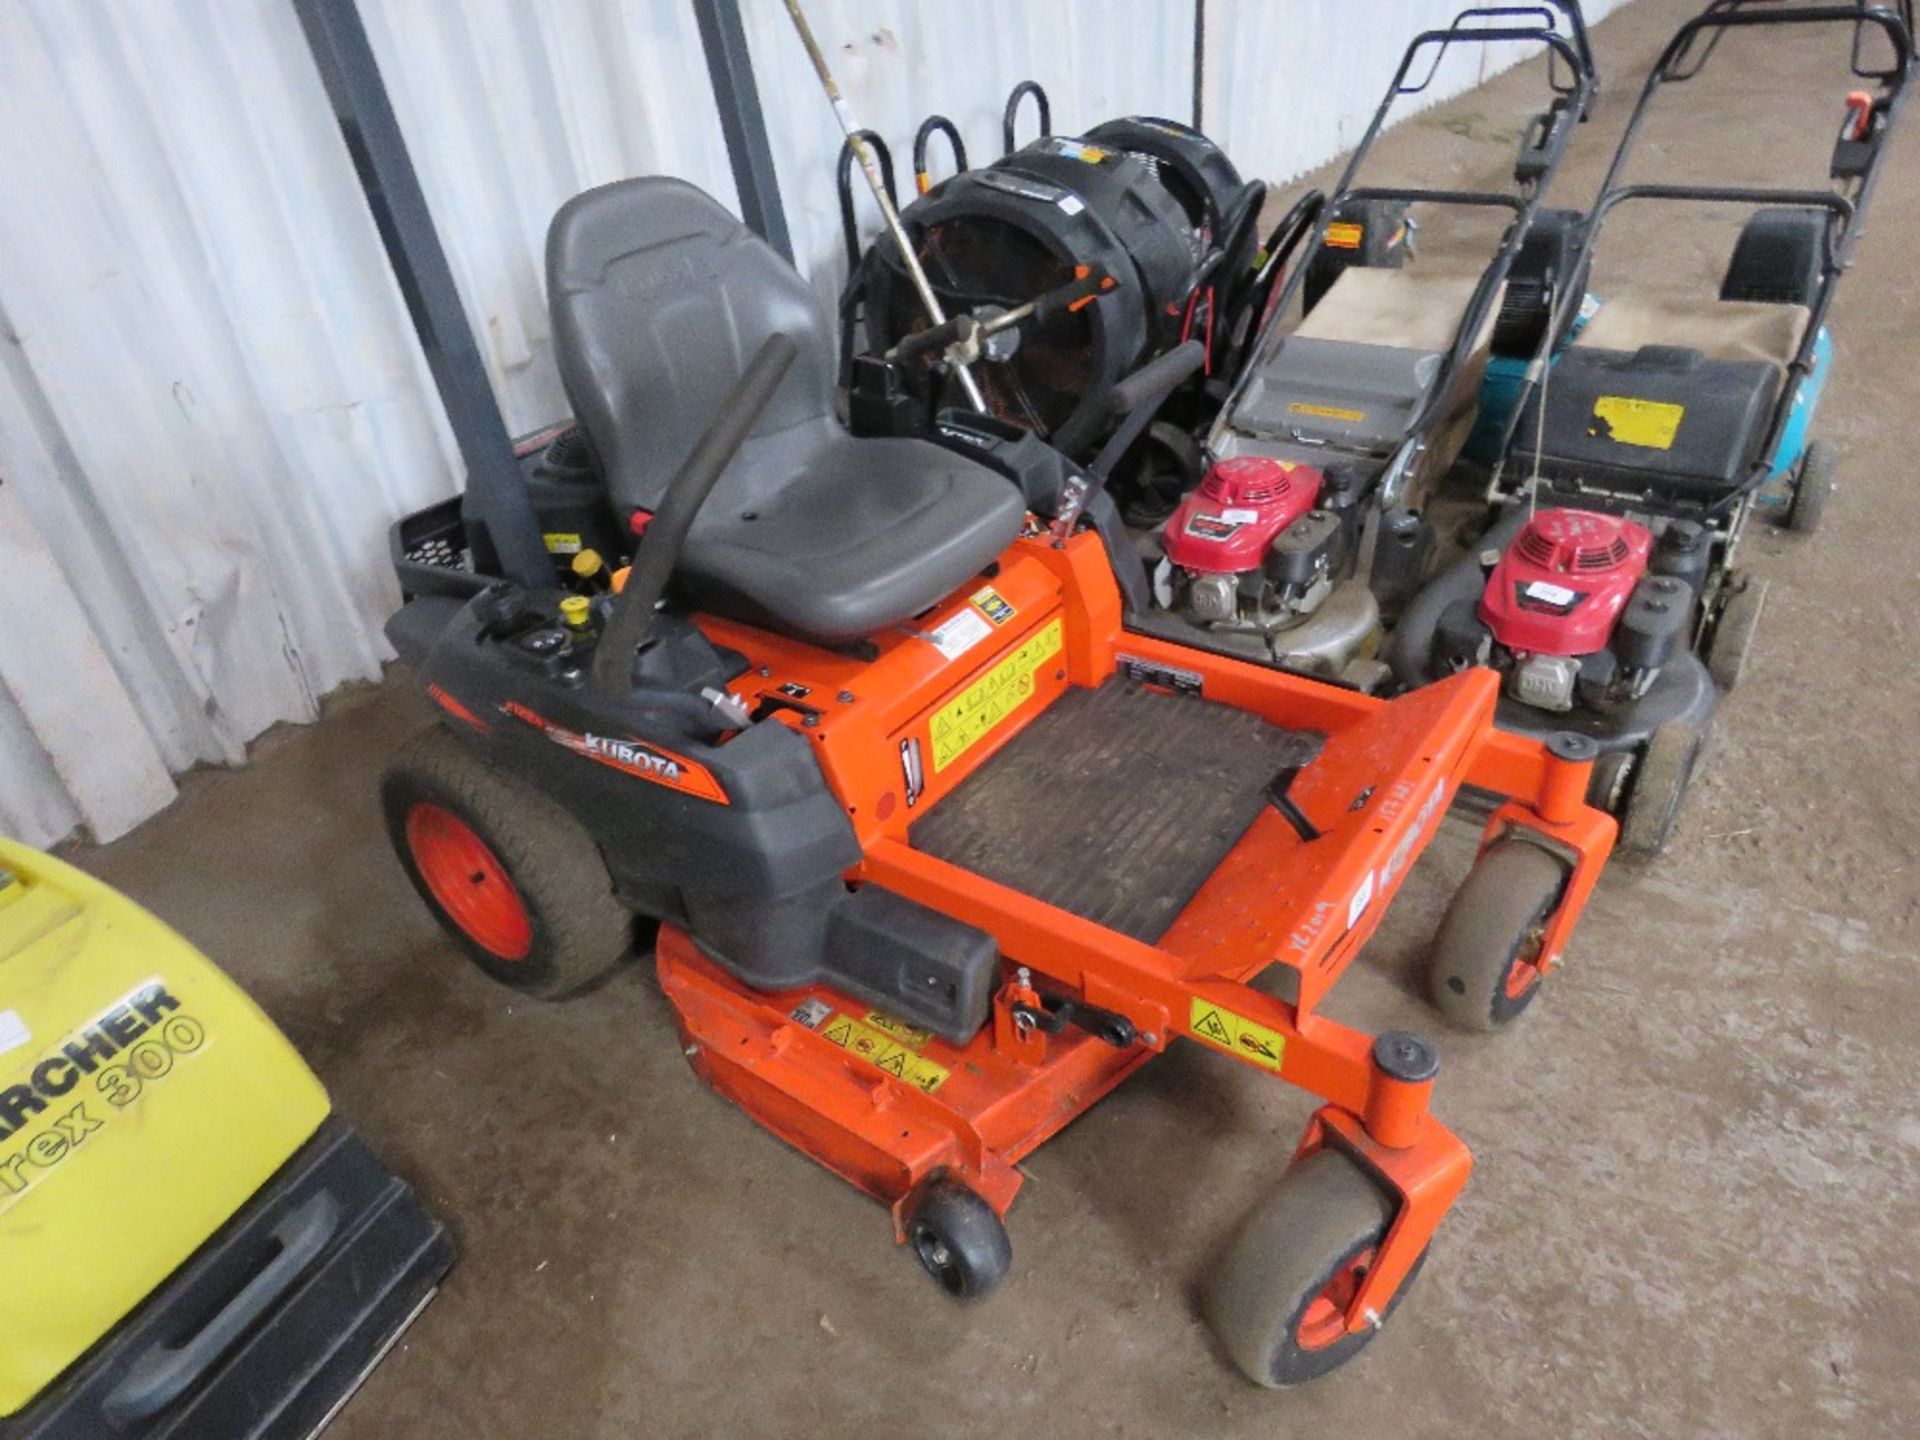 KUBOTA Z122R ZERO TURN RIDE ON MOWER YEAR 2019 157 REC HOURS. WHEN TESTED WAS SEEN TO RUN, DRIVE AND